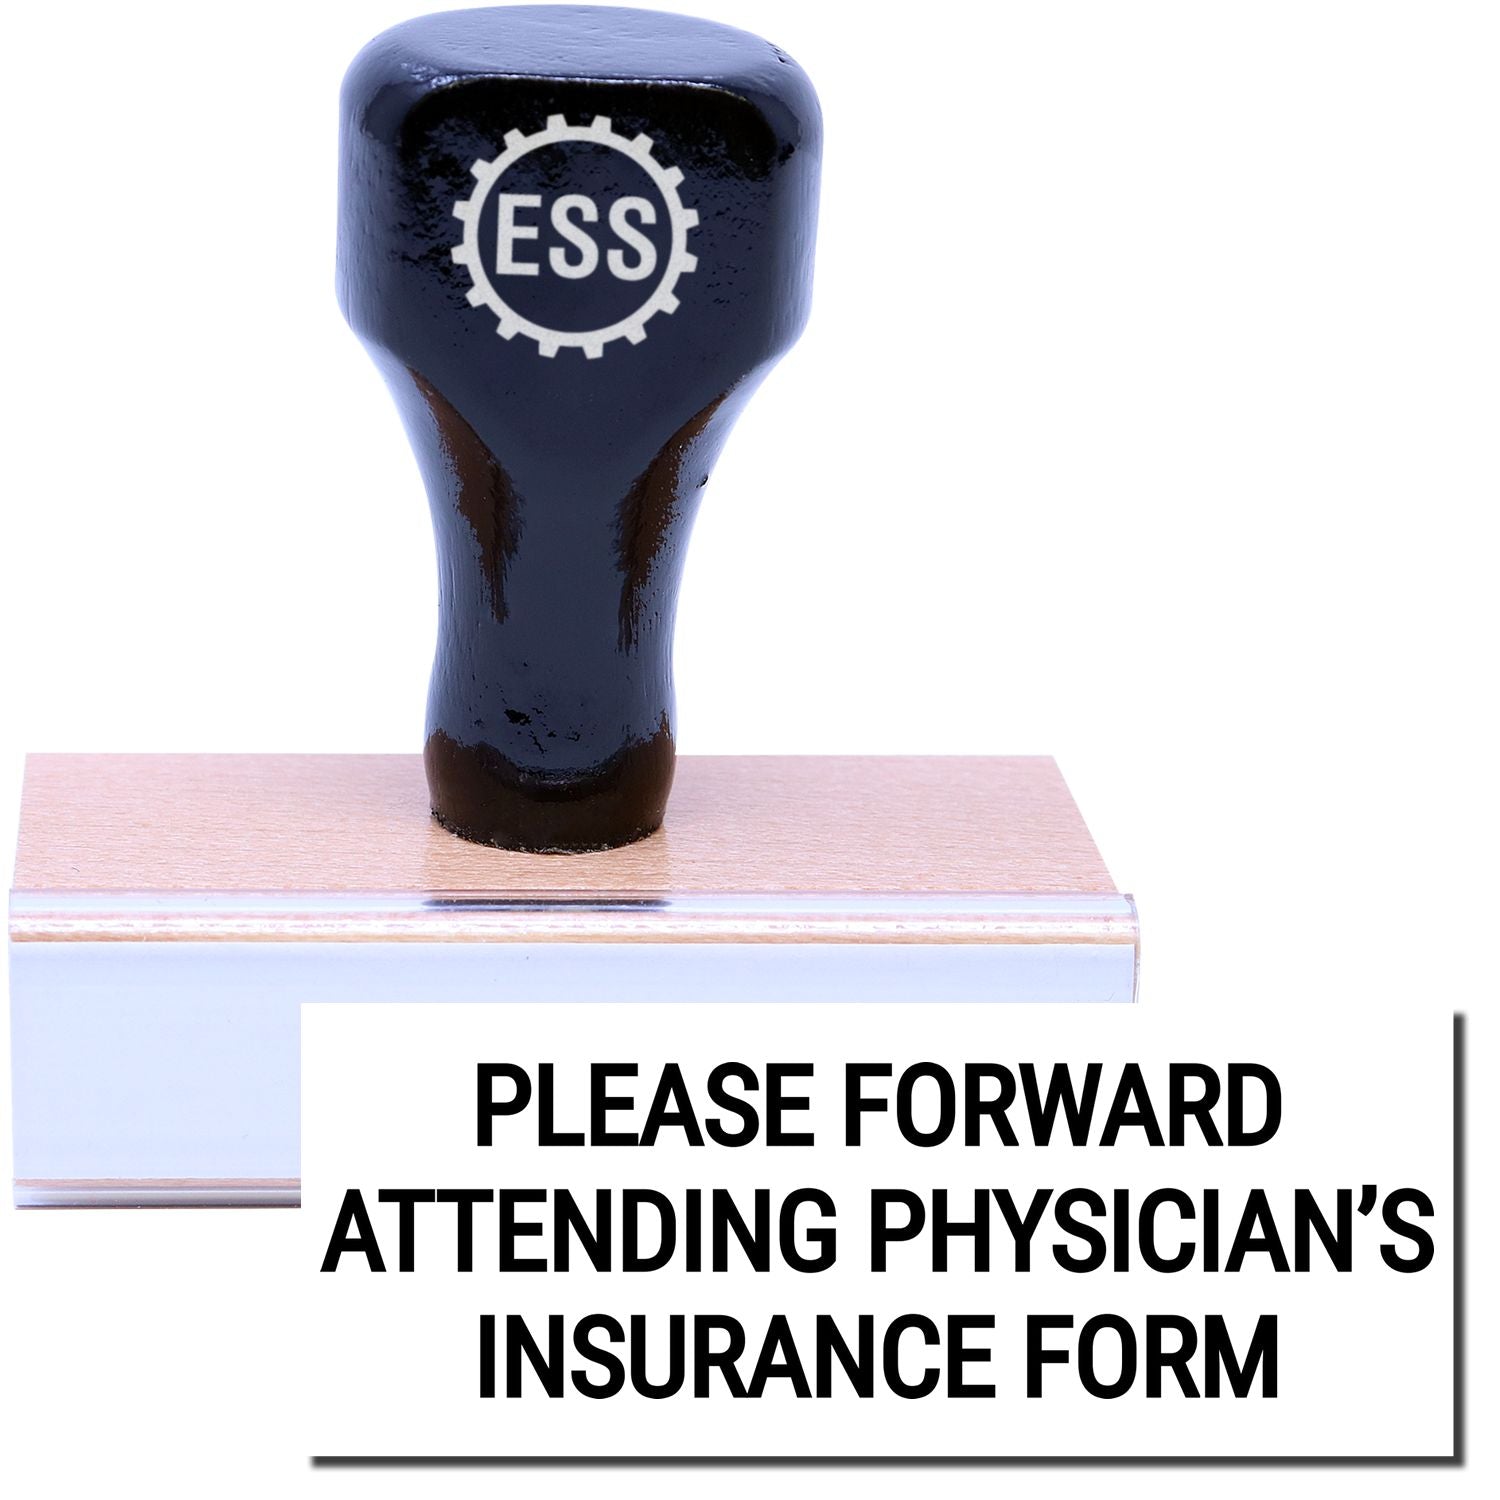 A stock office rubber stamp with a stamped image showing how the text "PLEASE FORWARD ATTENDING PHYSICIAN'S INSURANCE FORM" is displayed after stamping.